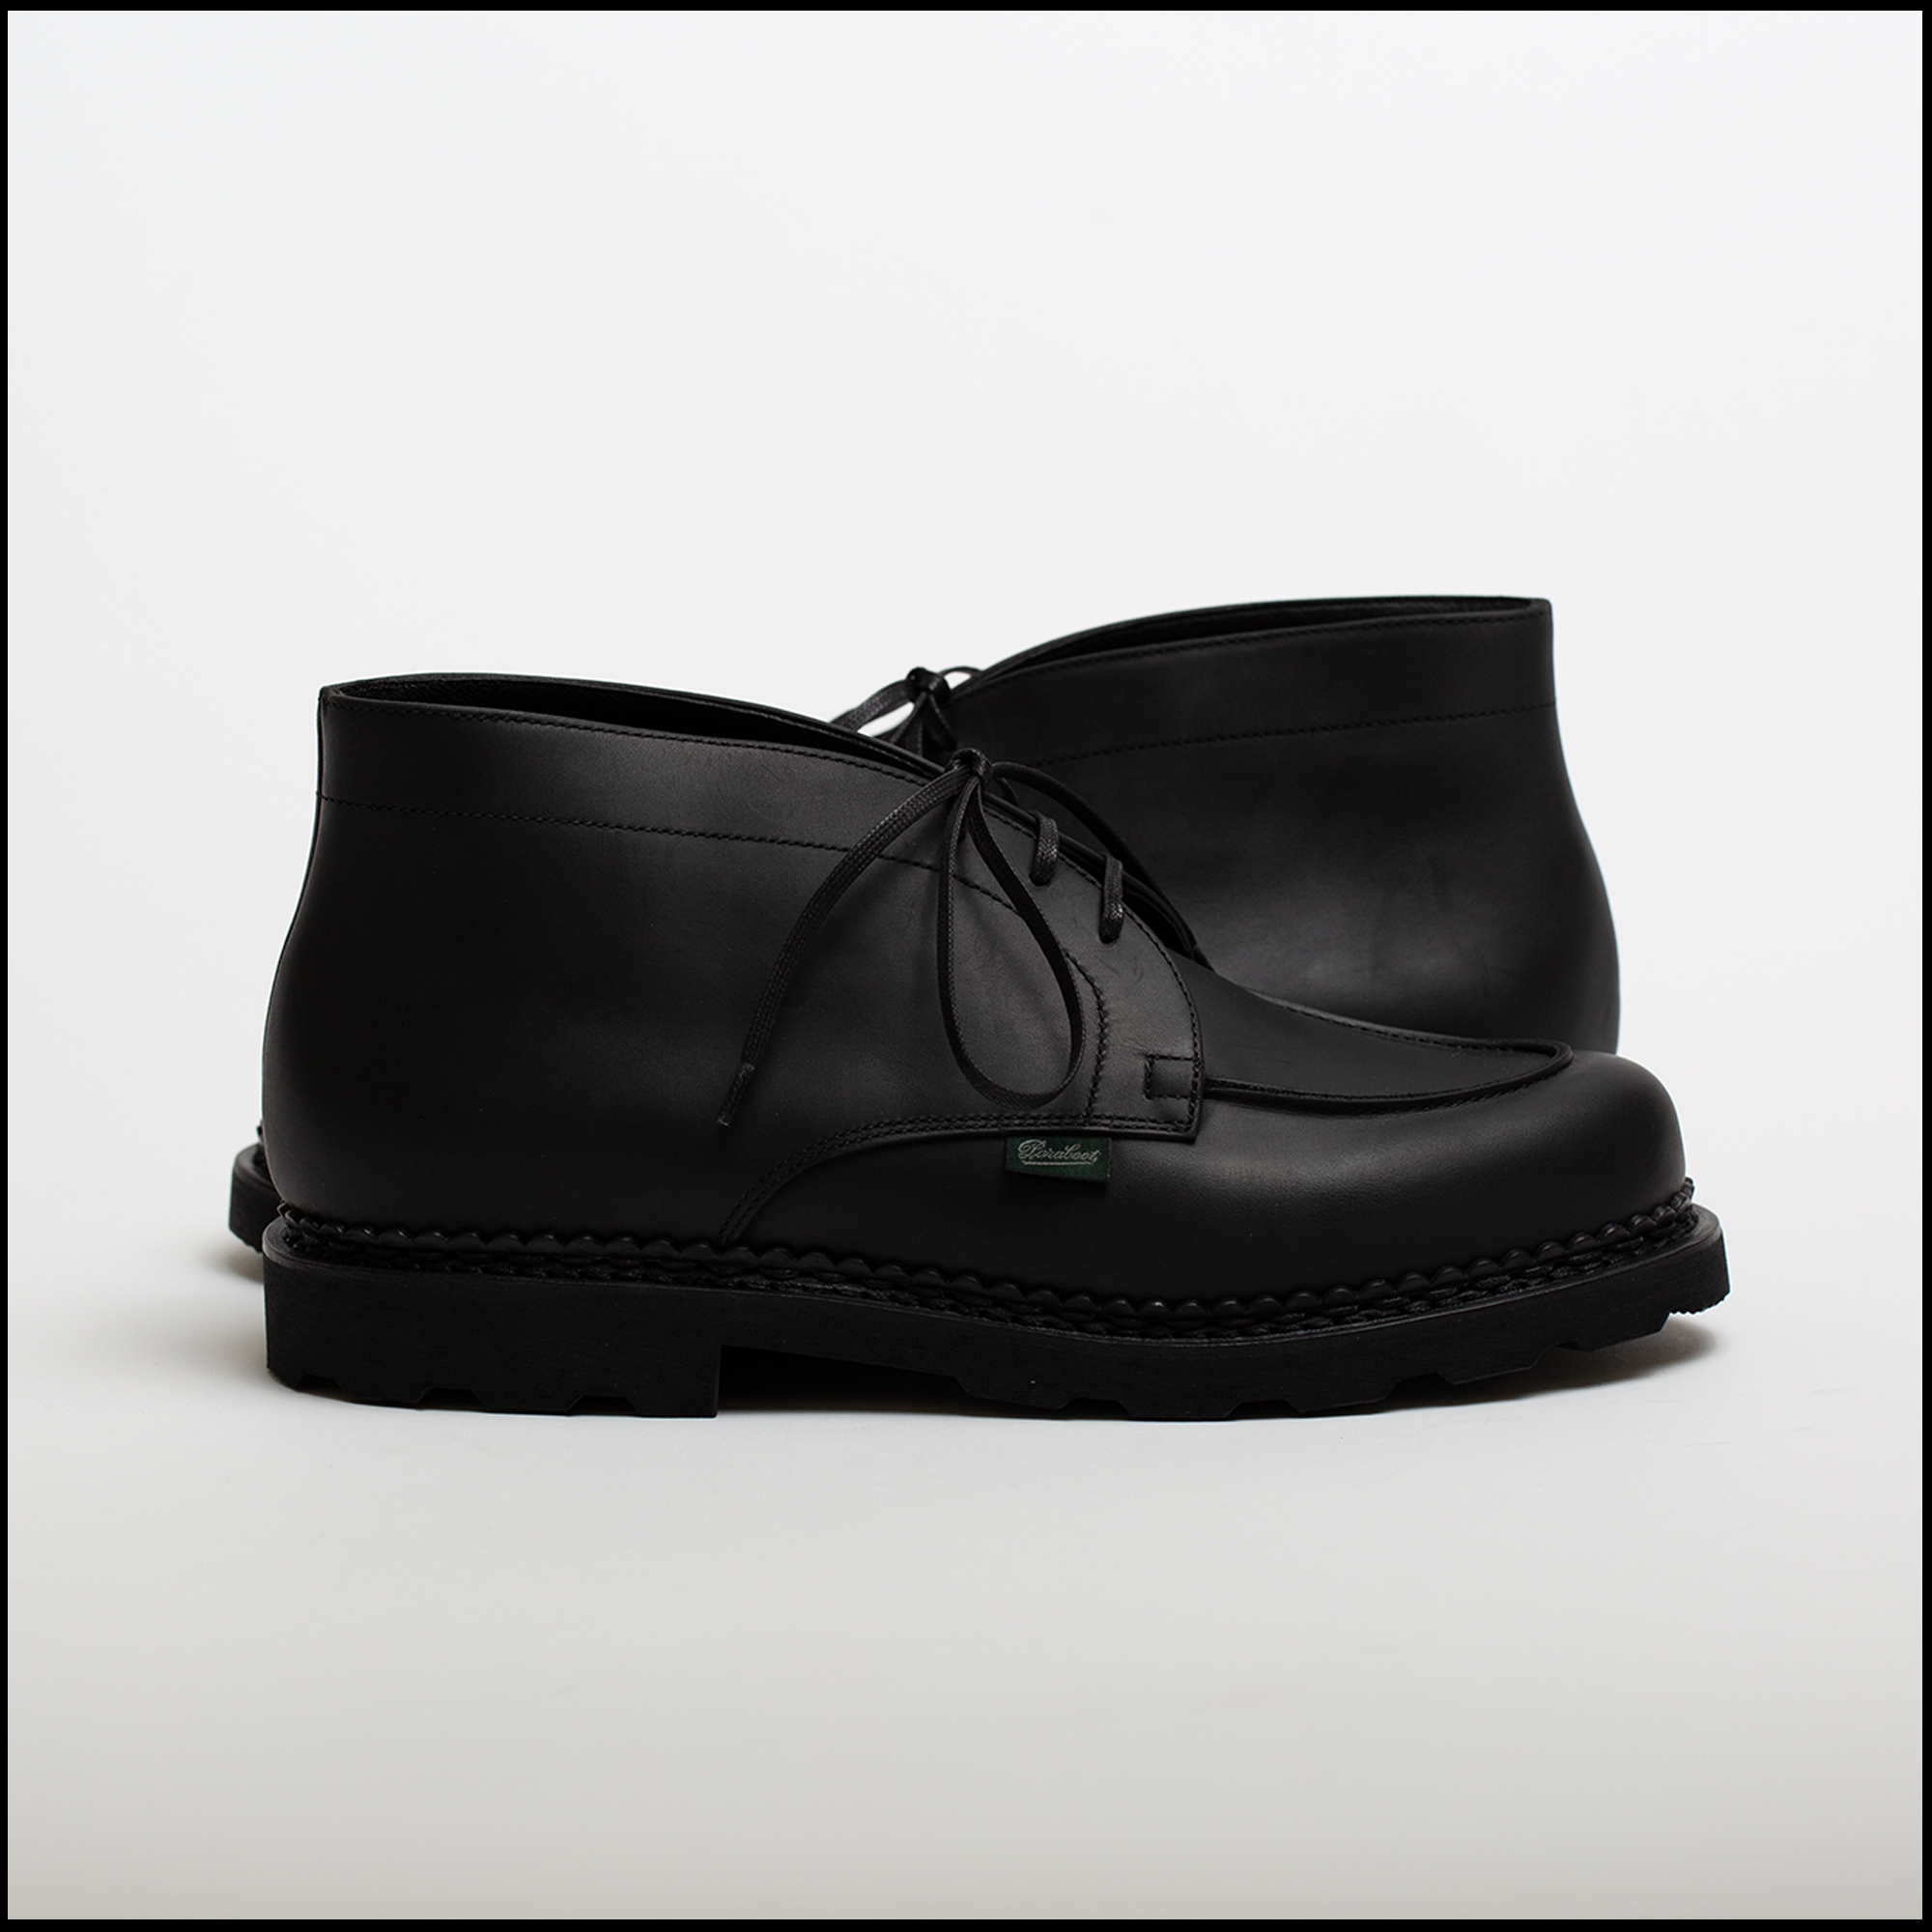 CHUKKA shoes in Black color by Paraboot for Arpenteur